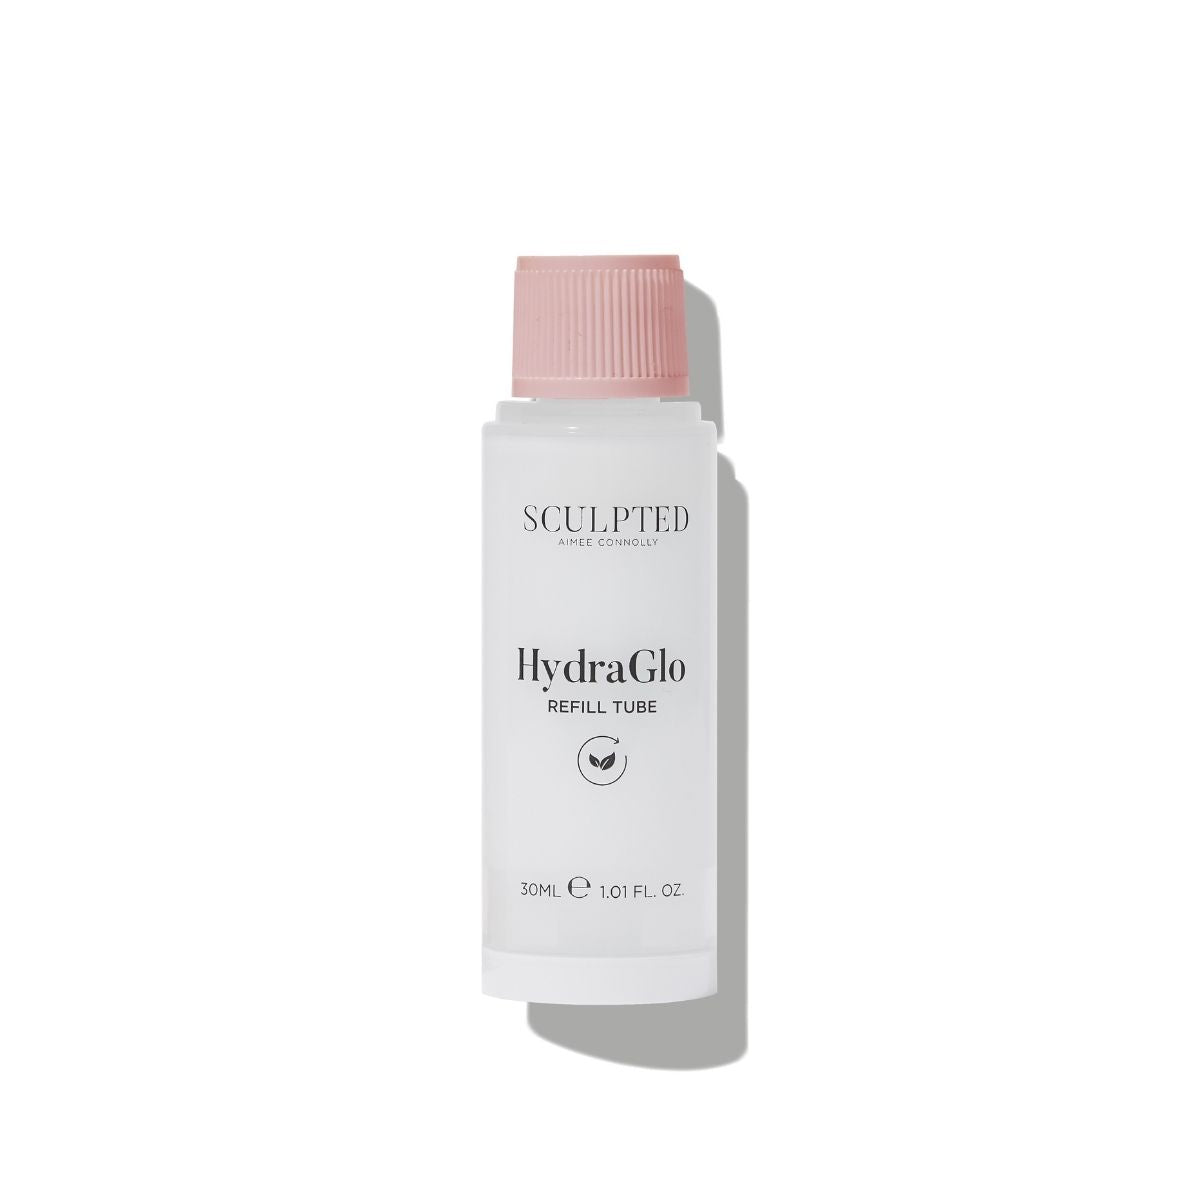 Sculpted By Aimee Connolly HydraGlo Face Serum Refill